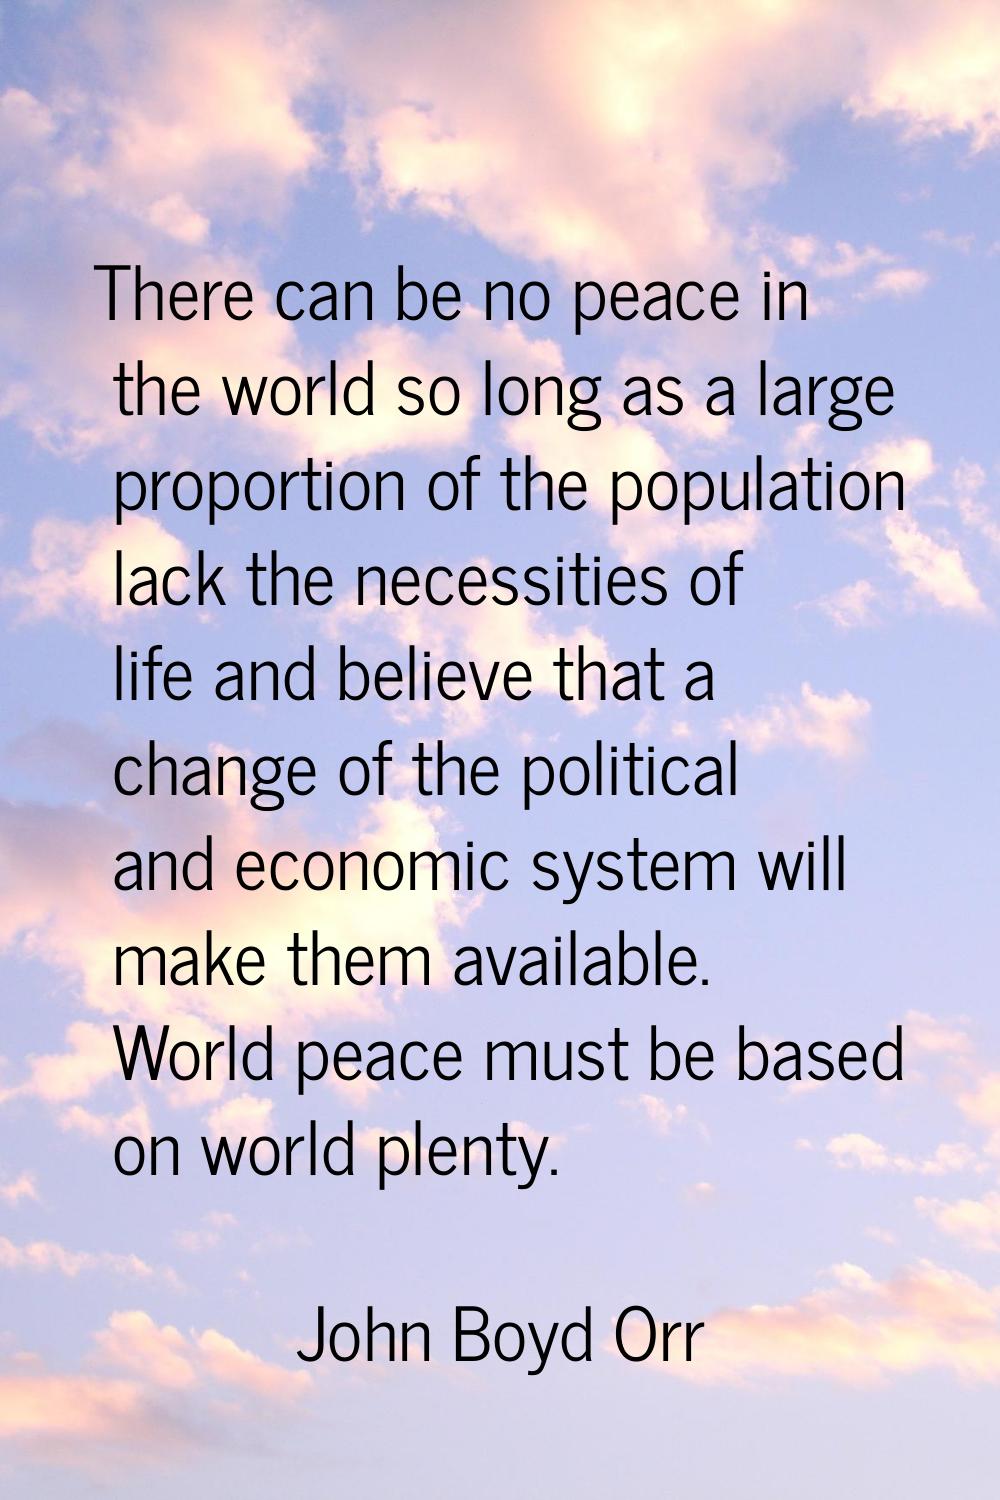 There can be no peace in the world so long as a large proportion of the population lack the necessi